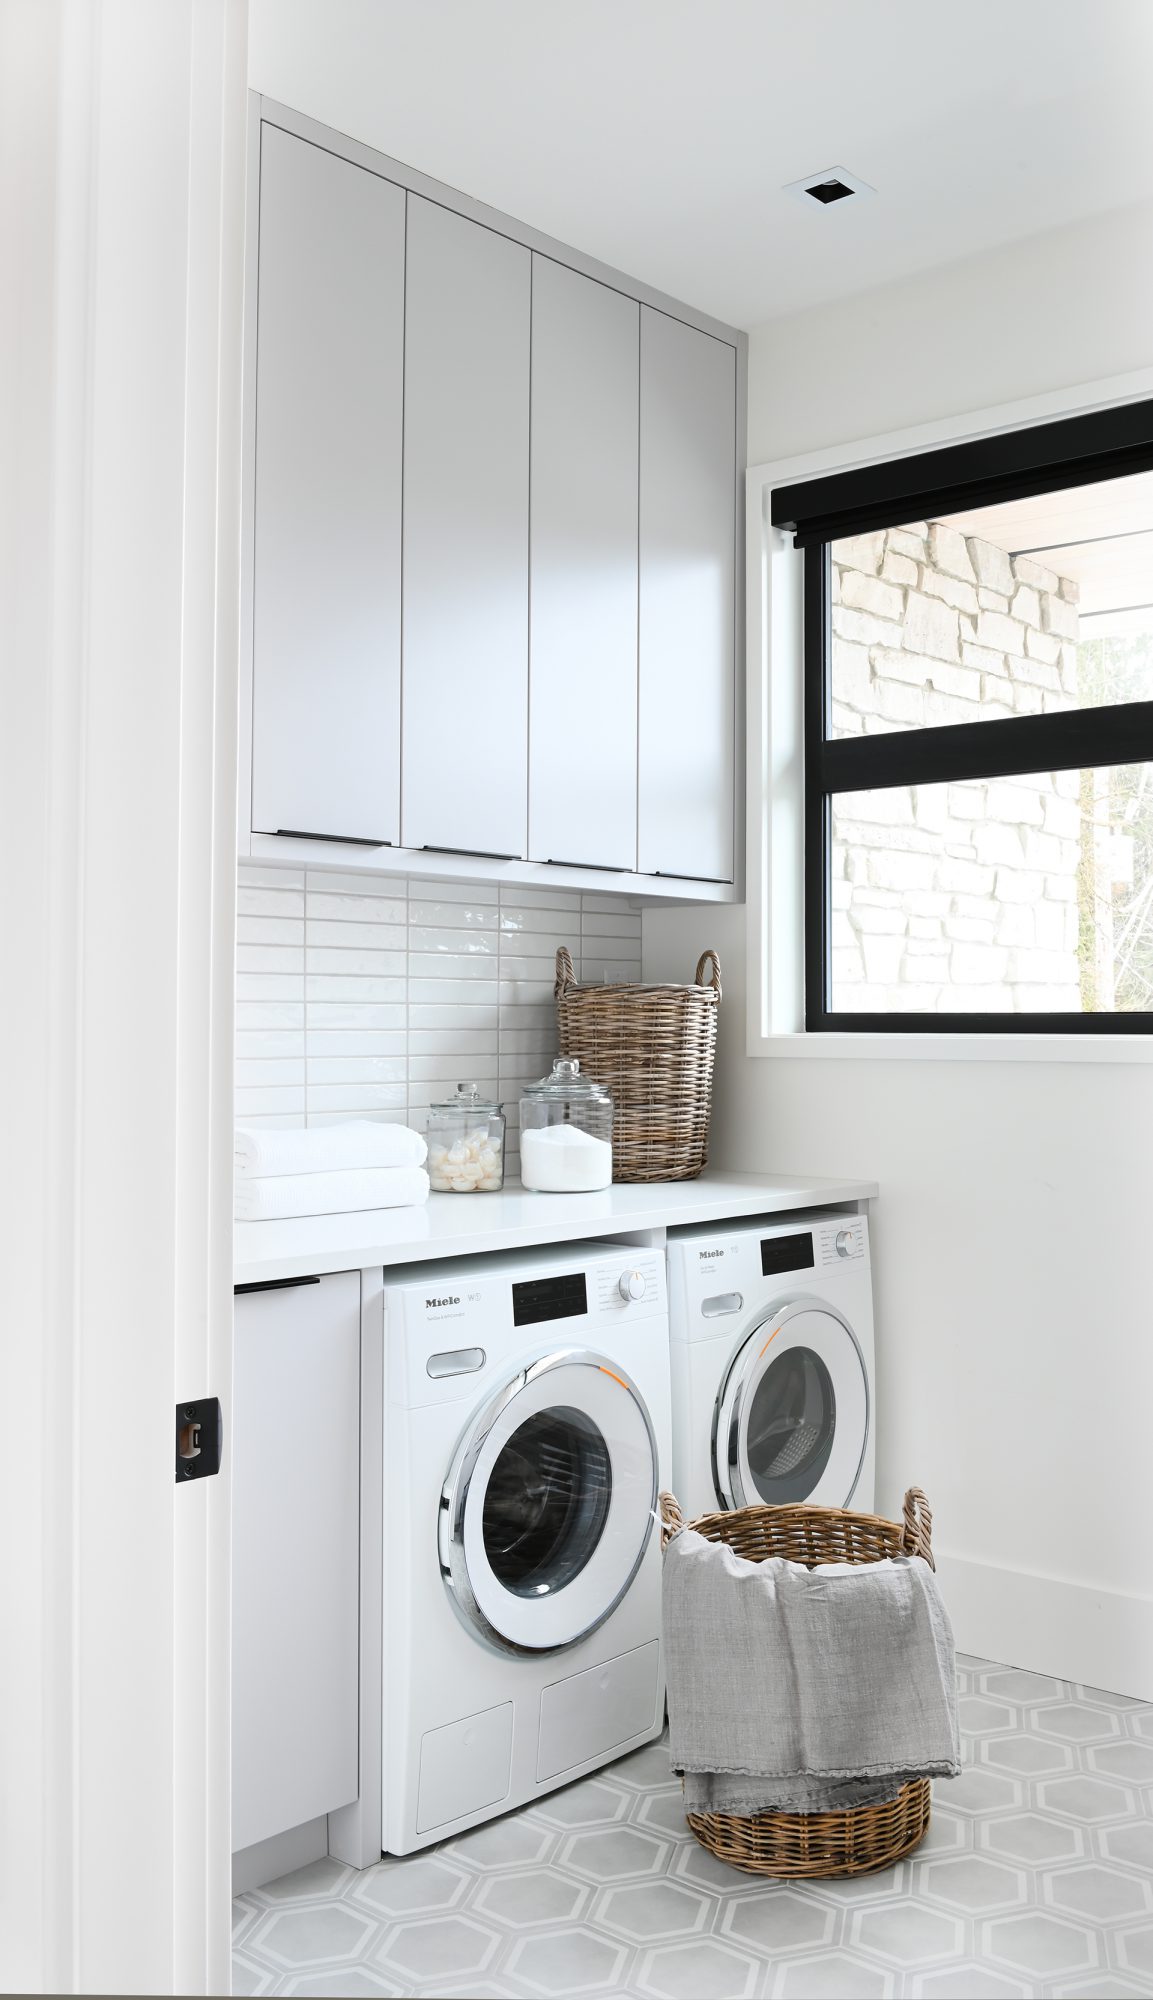 Ferme Moderne laundry room built by Midland Premium Properties in Vancouver, BC